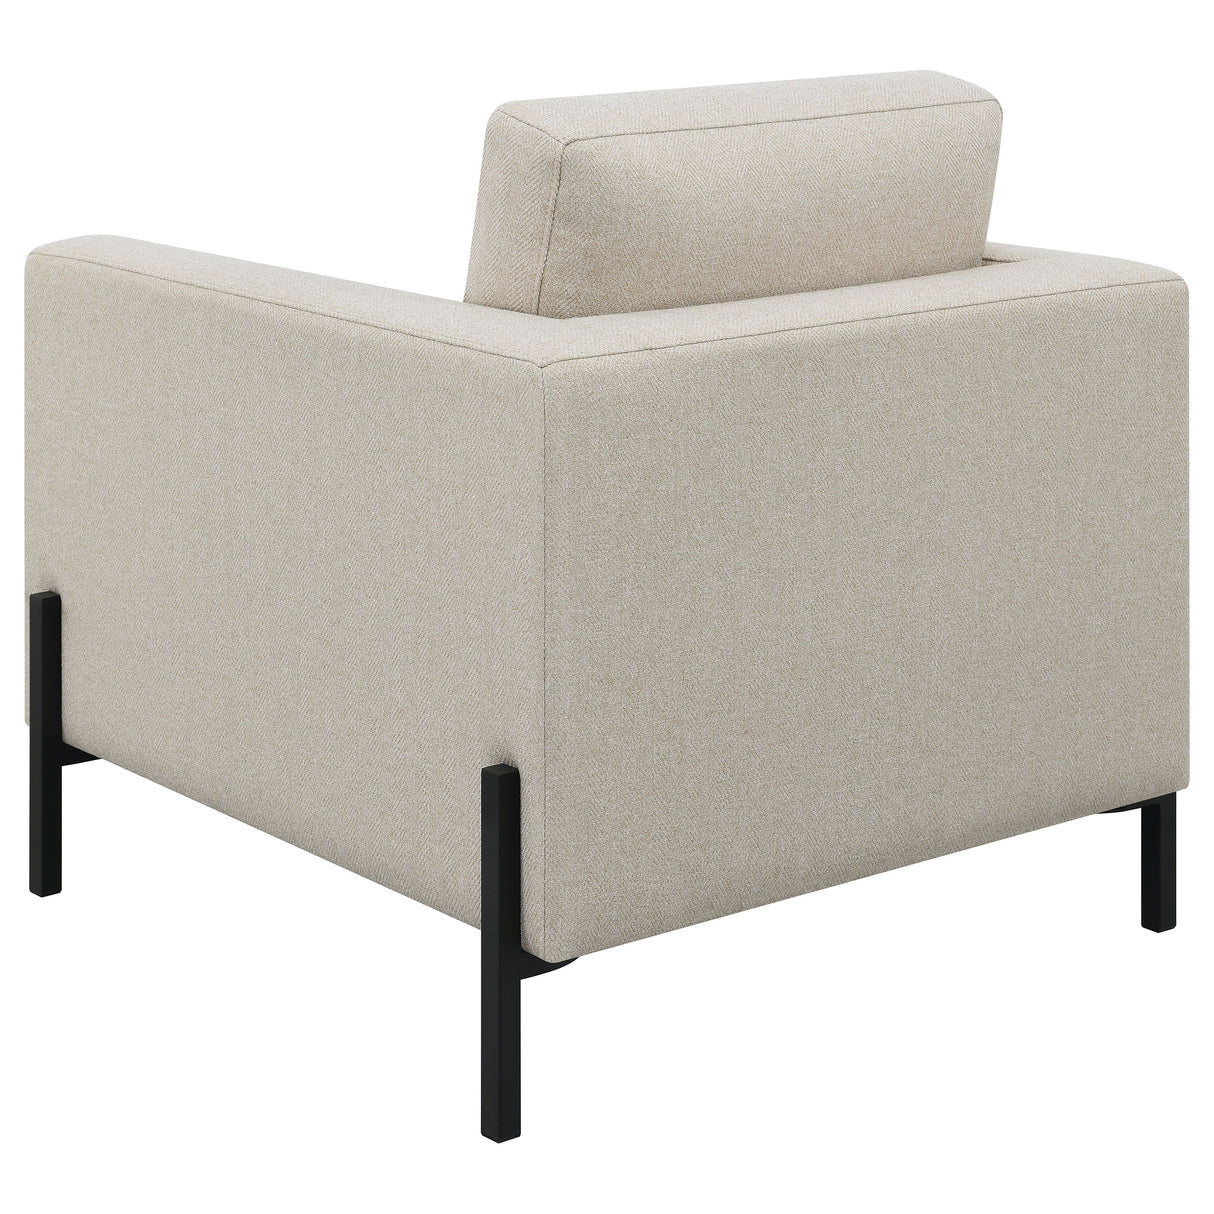 Chair - Tilly Upholstered Track Arms Chair Oatmeal